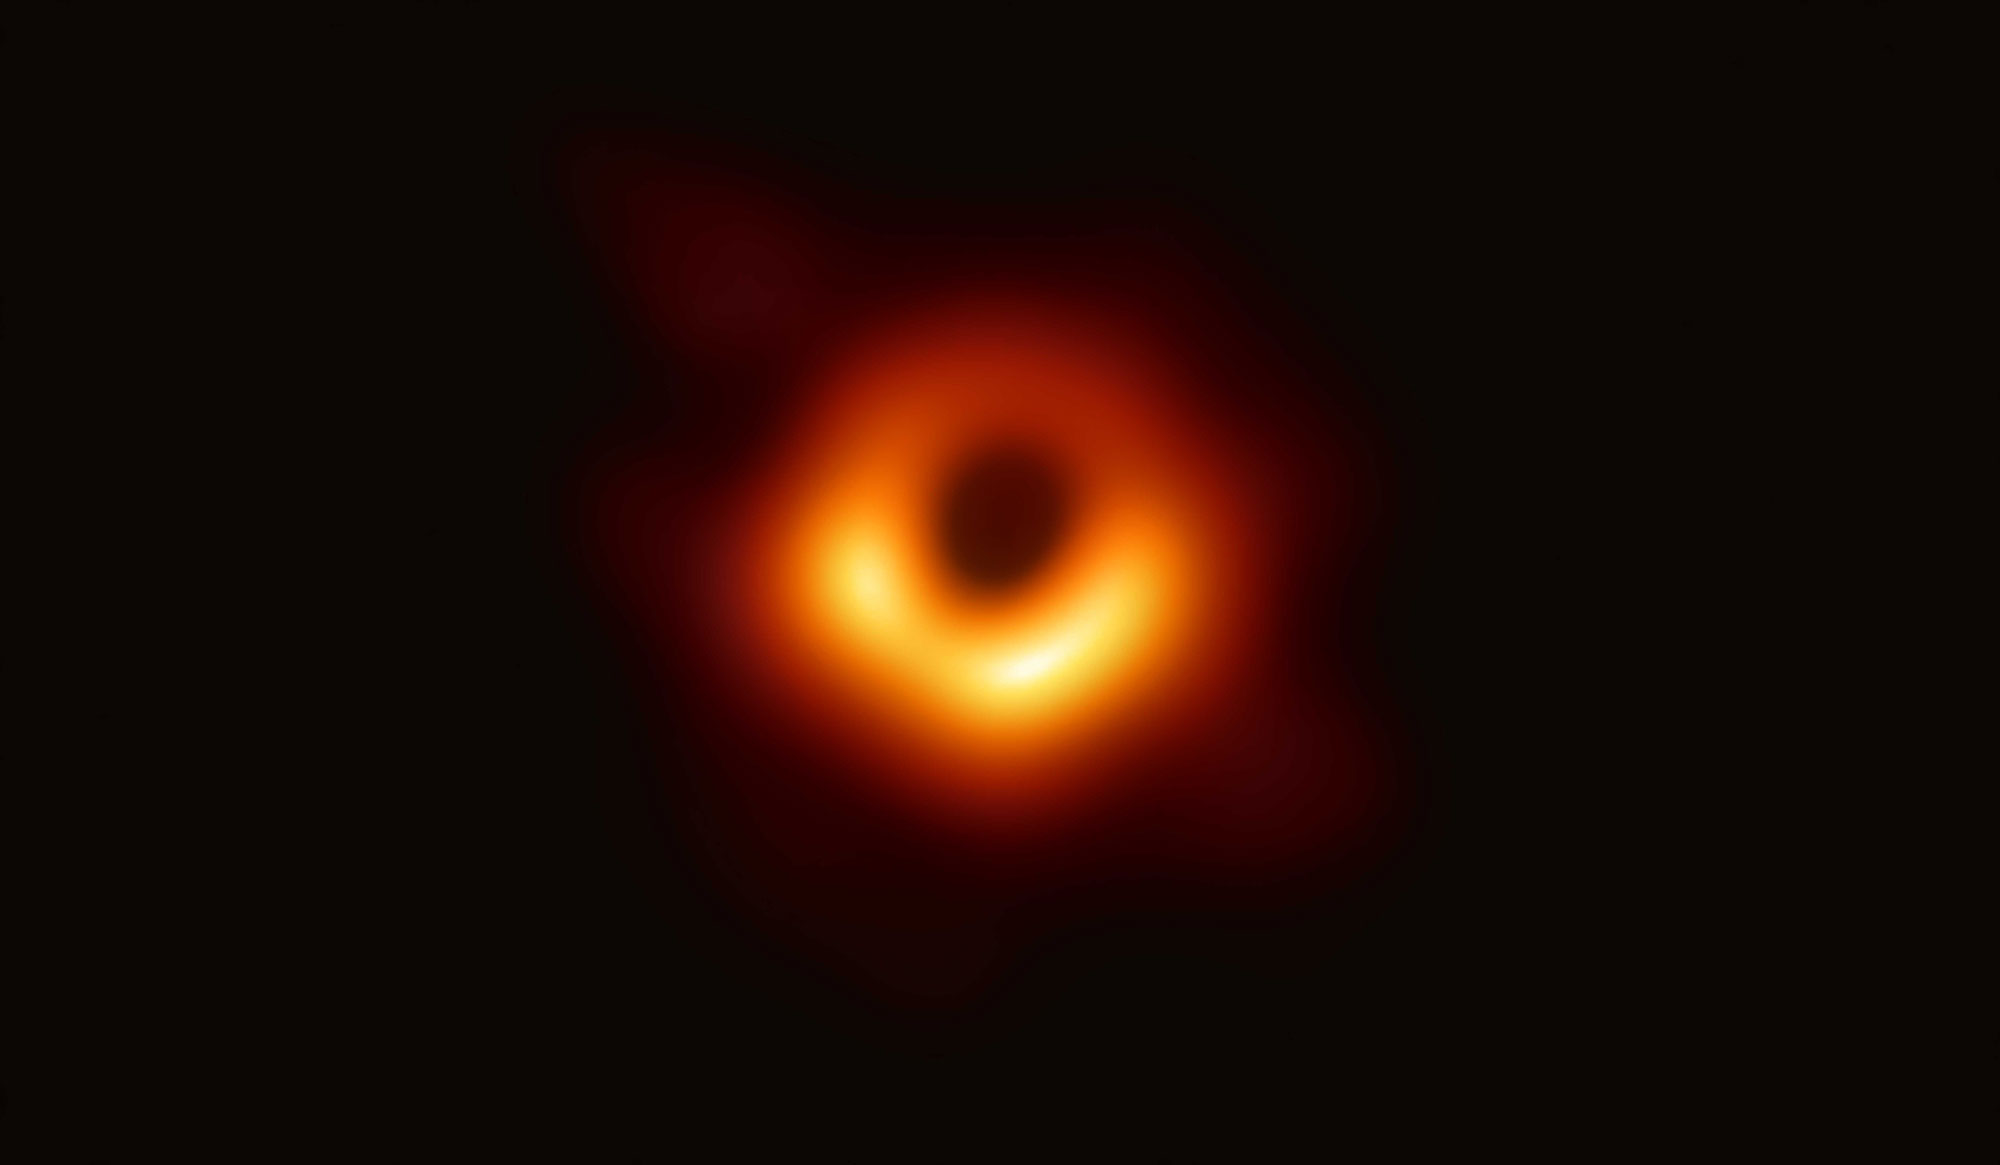 The First Black Hole Image: A Gravitomagnetic Monopole as an Alternative Explanation thumbnail